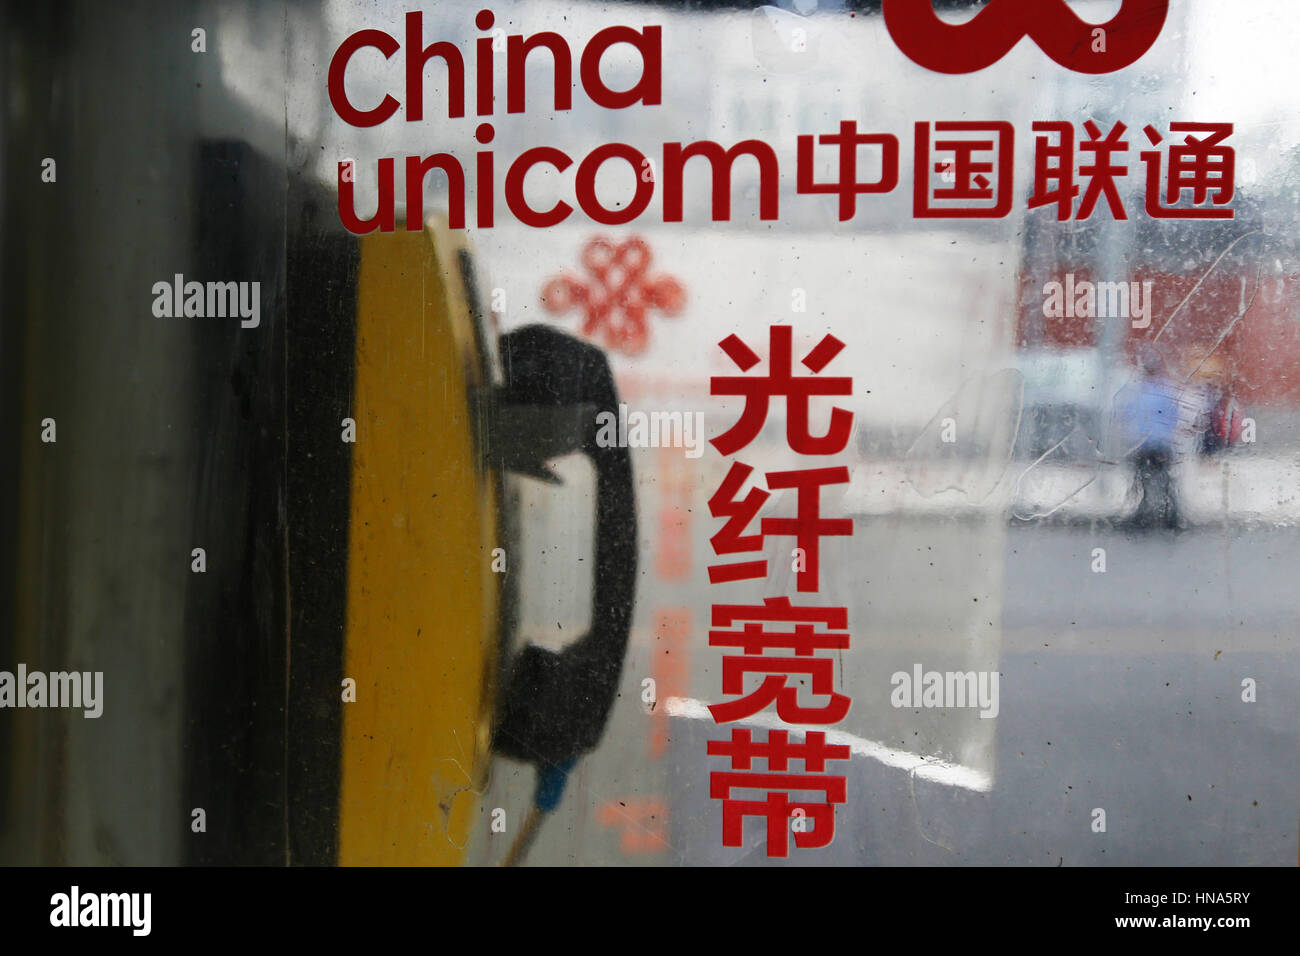 A public telephone operated by China Unicom nahgs in a booth in Beijing, China, Thursday, July 28, 2016  Photograph : © Luke MacGregor +44 (0) 79 79 7 Stock Photo